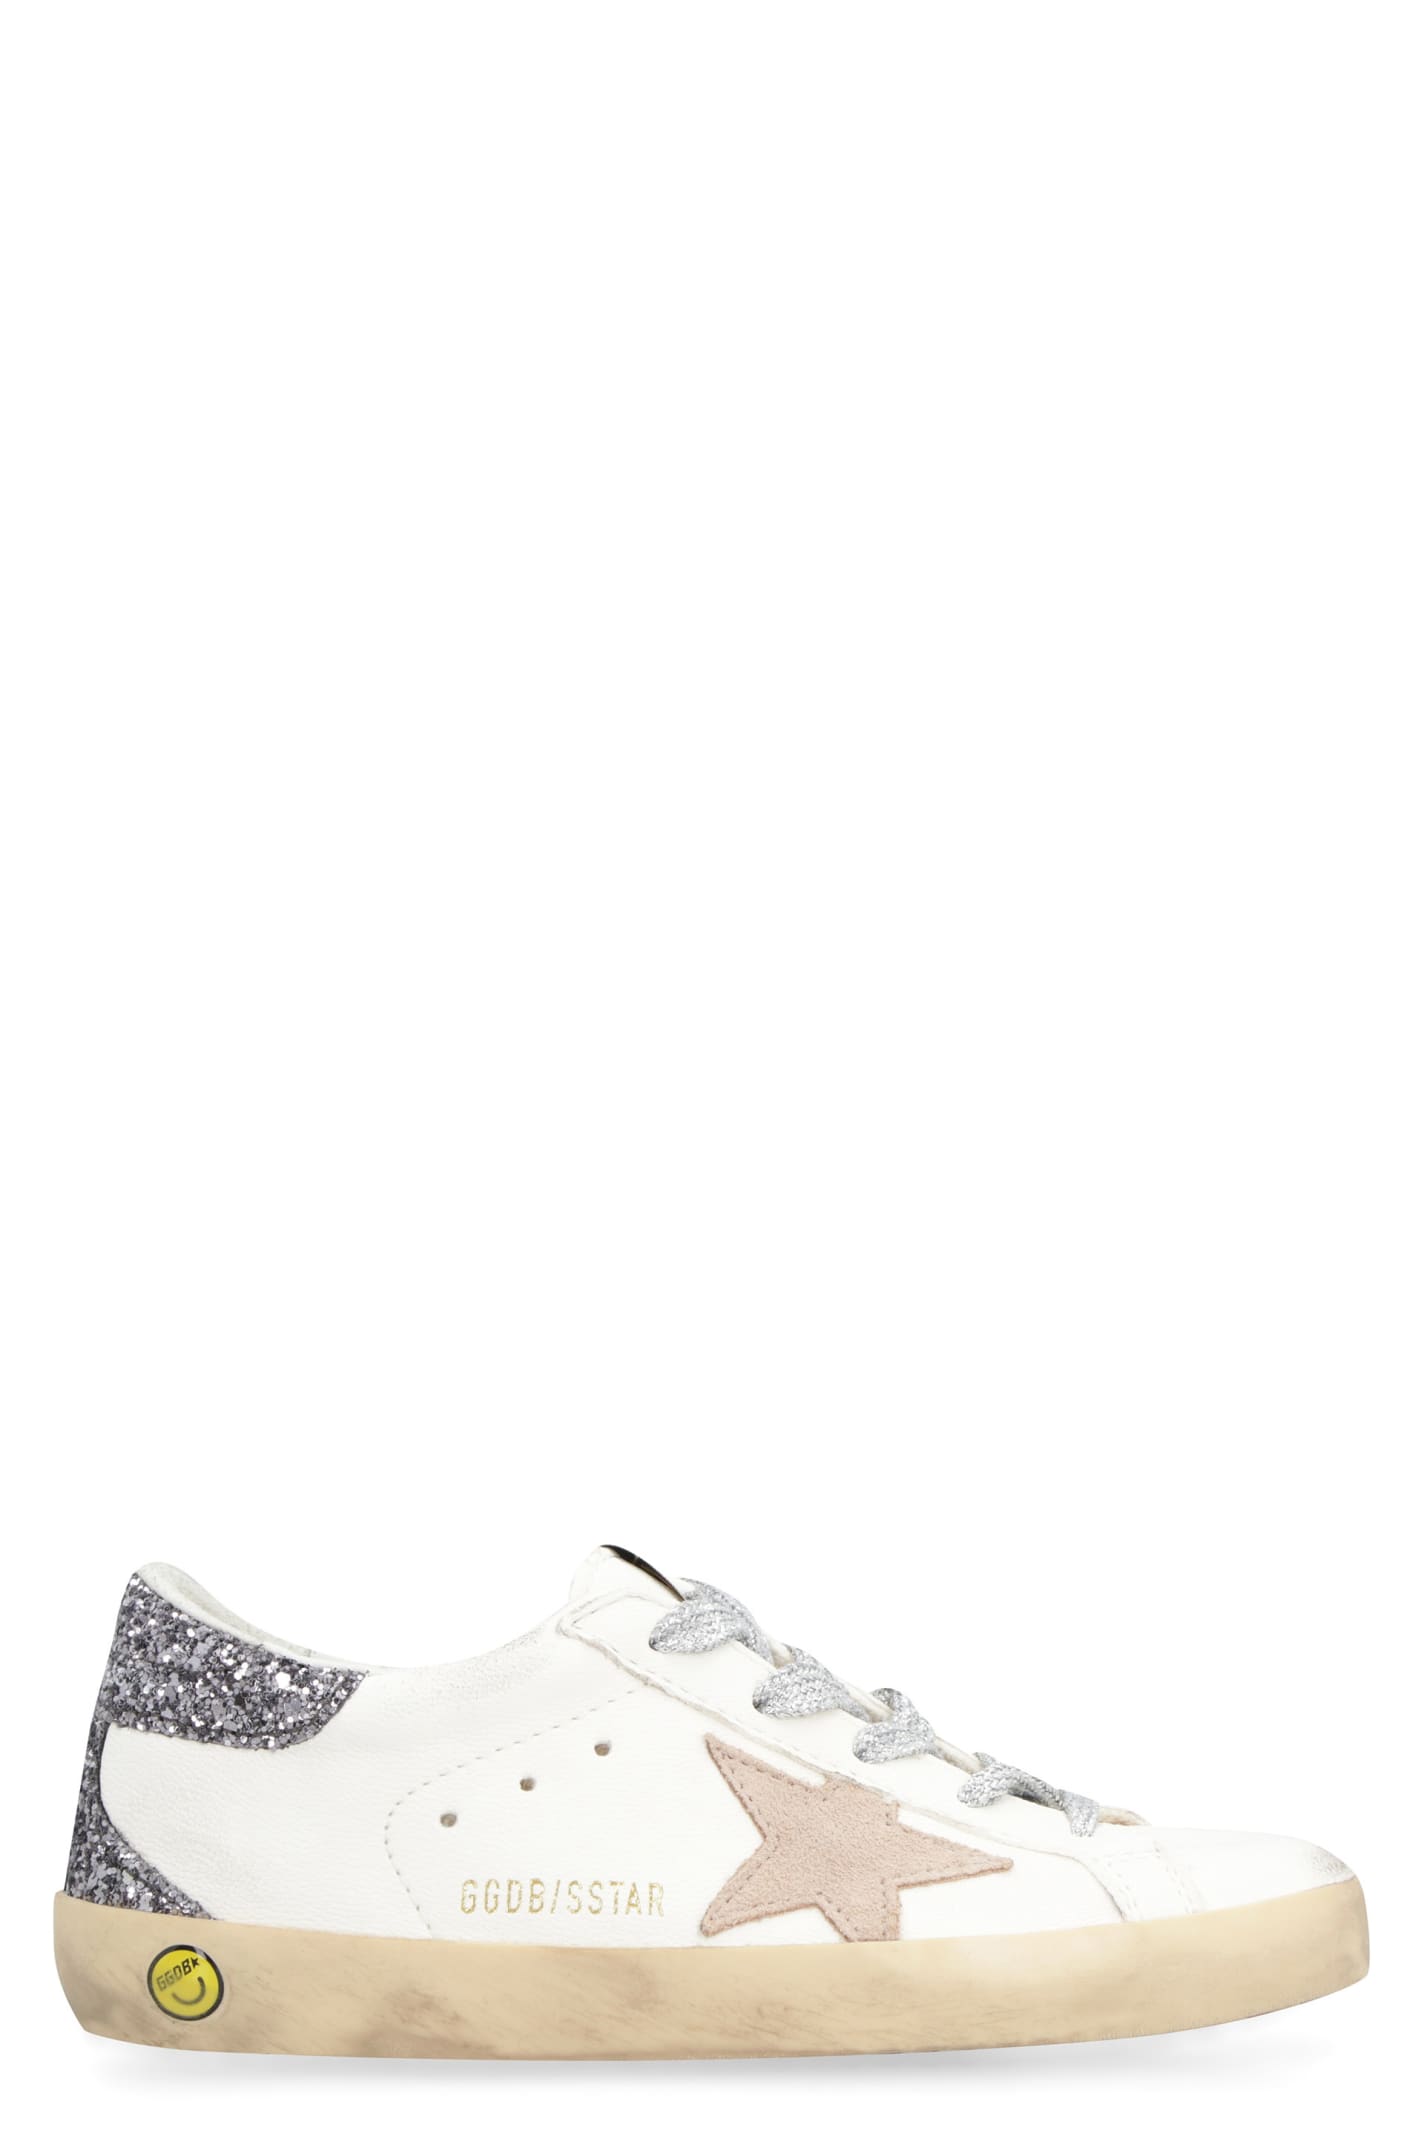 Golden Goose Kids' Super-star Leather Sneakers In White